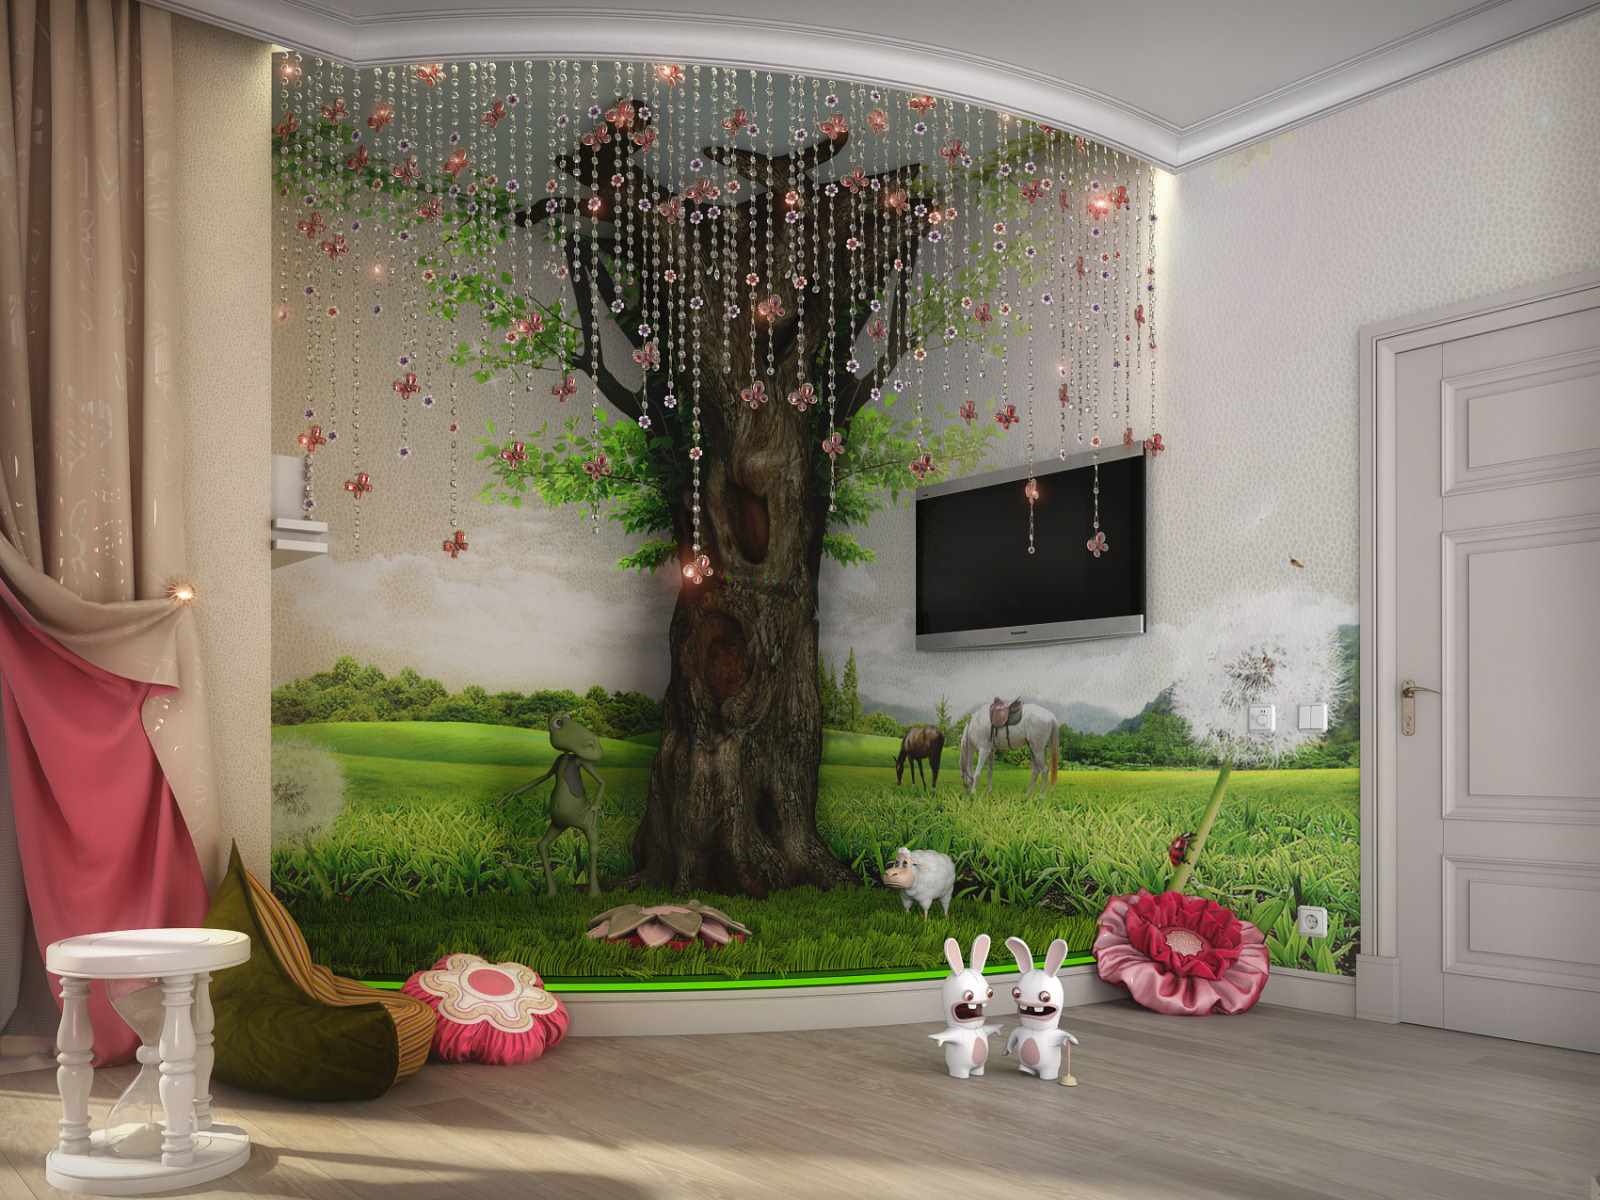 variant of unusual bedroom decor for a girl